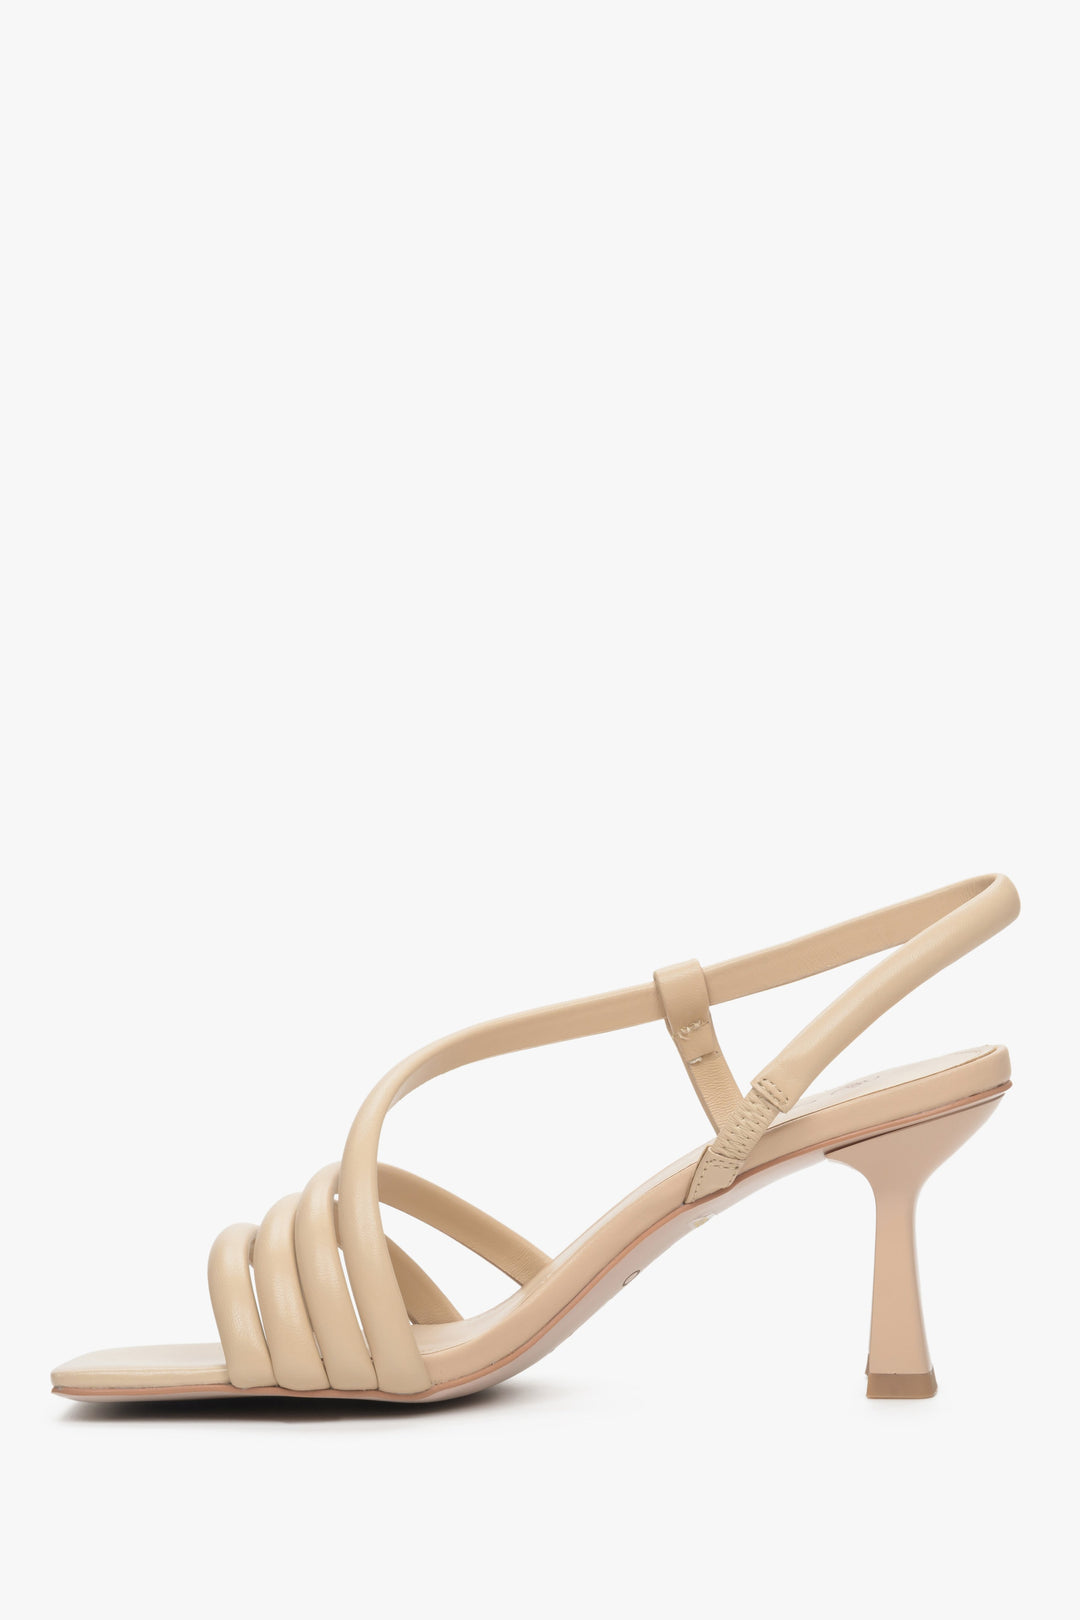 Natural leather Estro strappy sandals in beige.